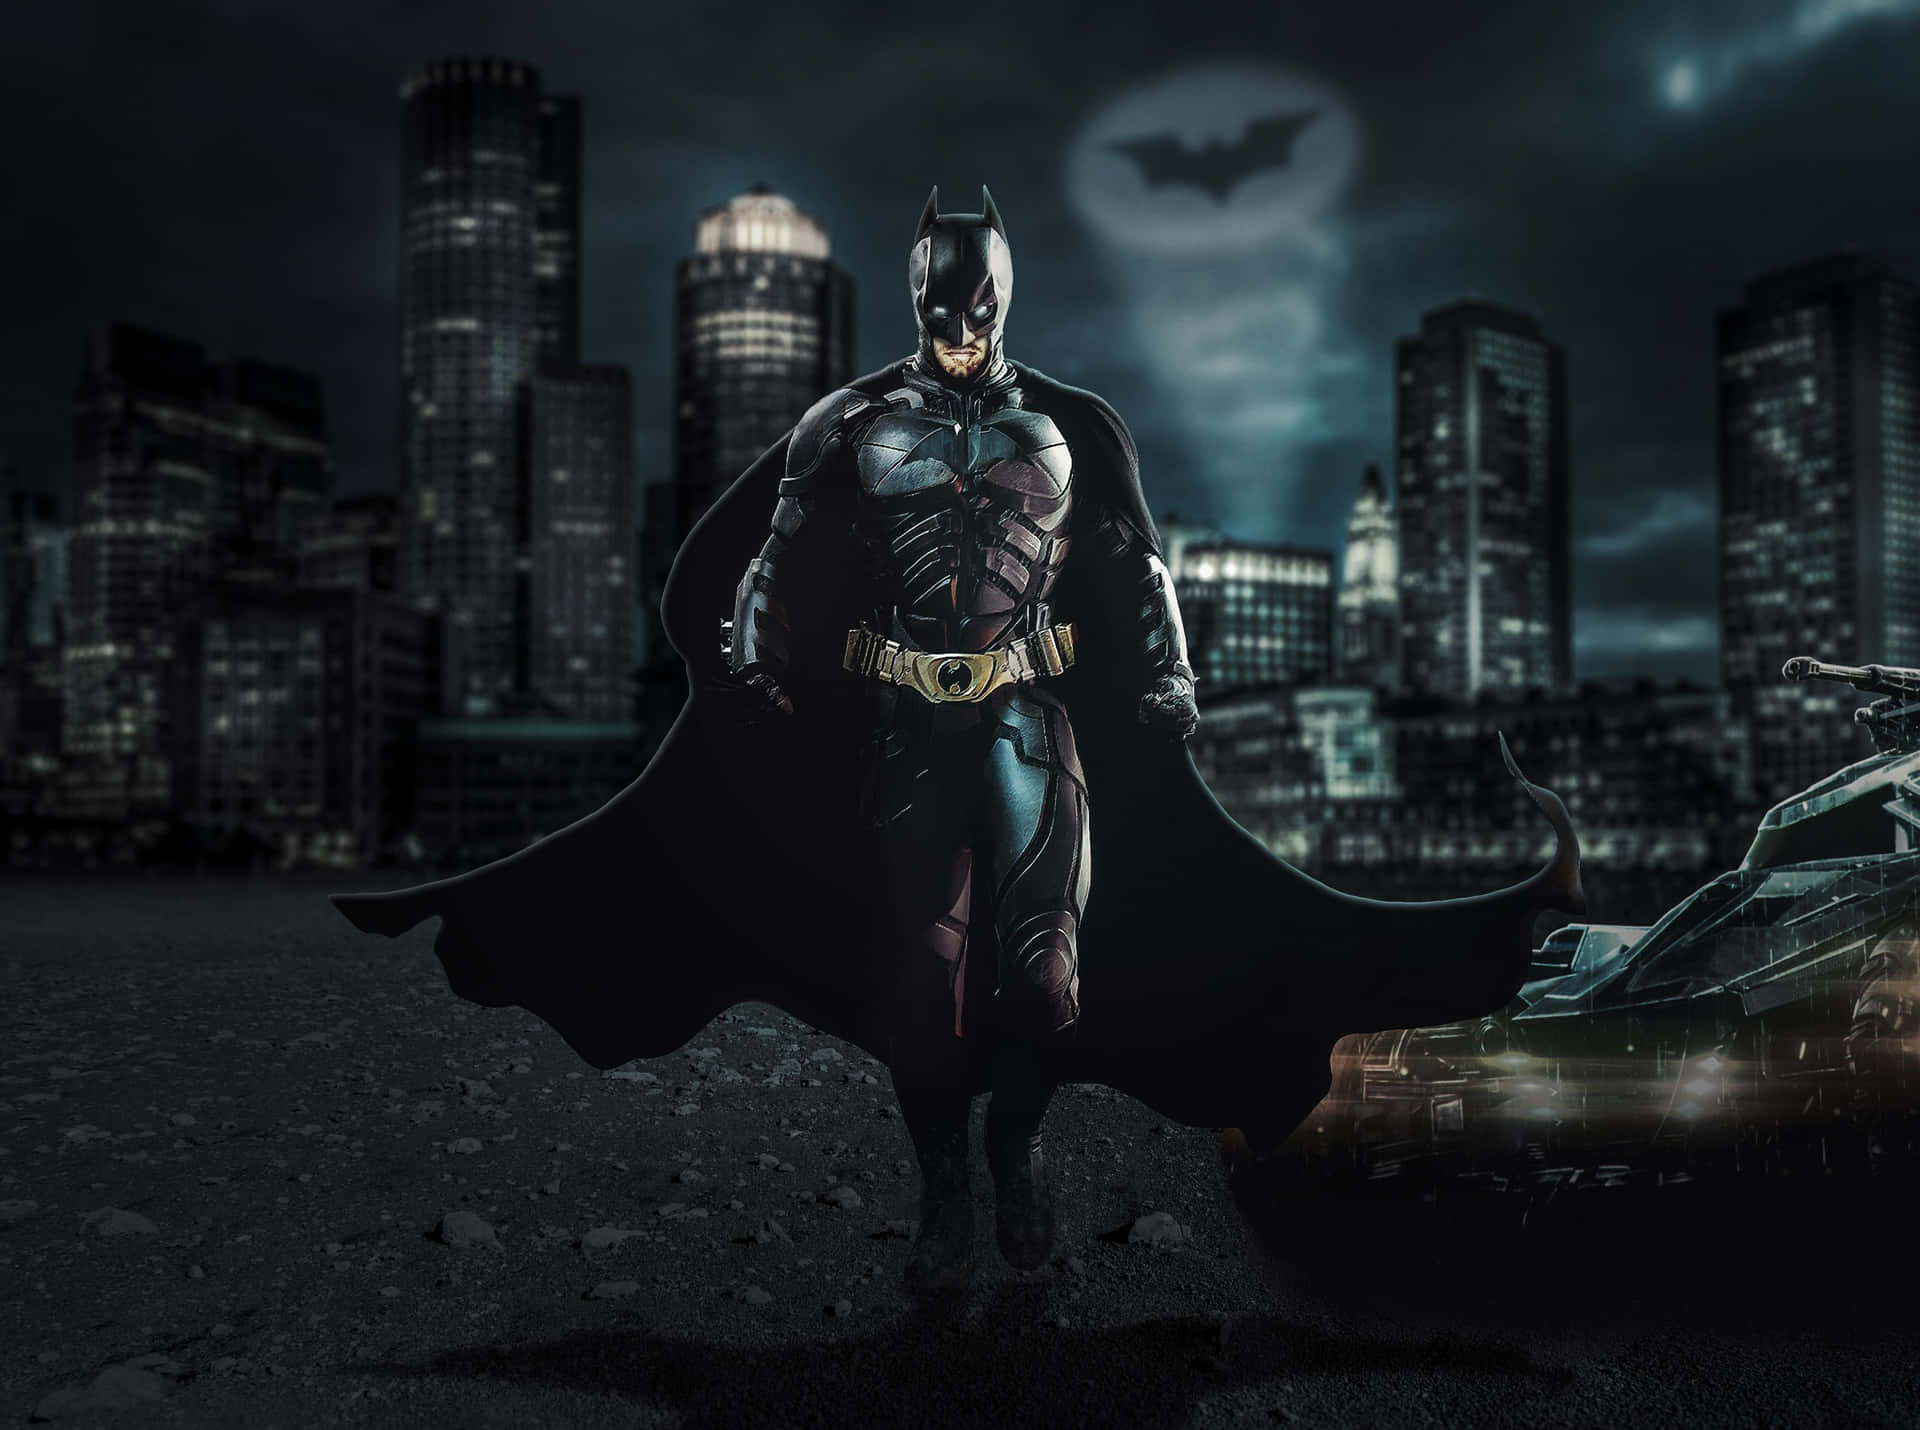 "Feel the power and speed of the Batmobile with this 4K background image."